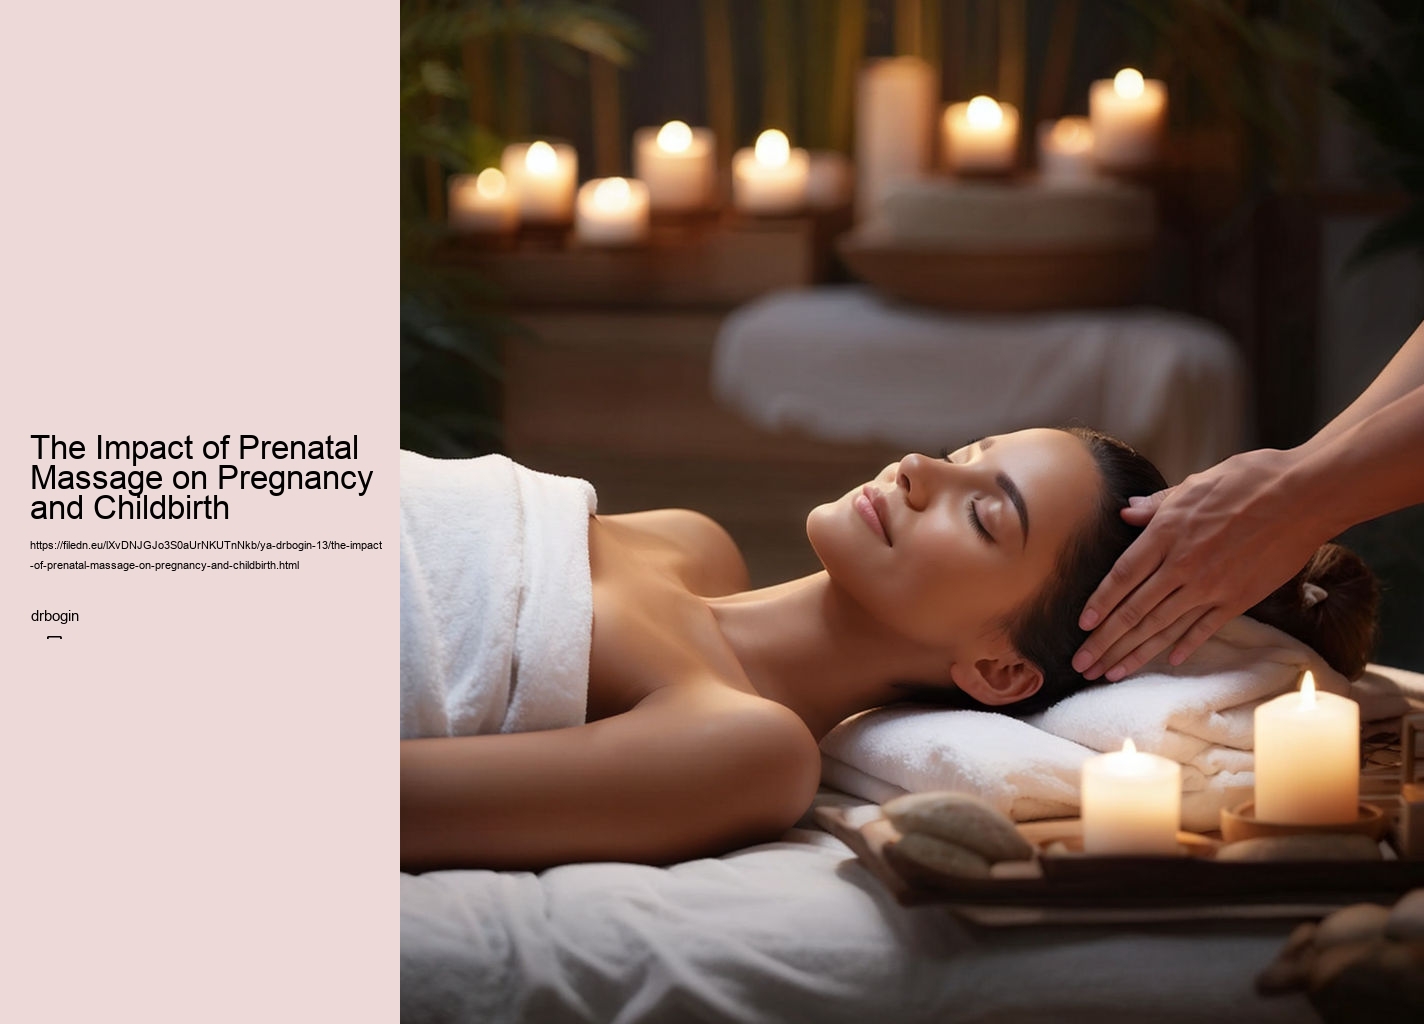 The Impact of Prenatal Massage on Pregnancy and Childbirth